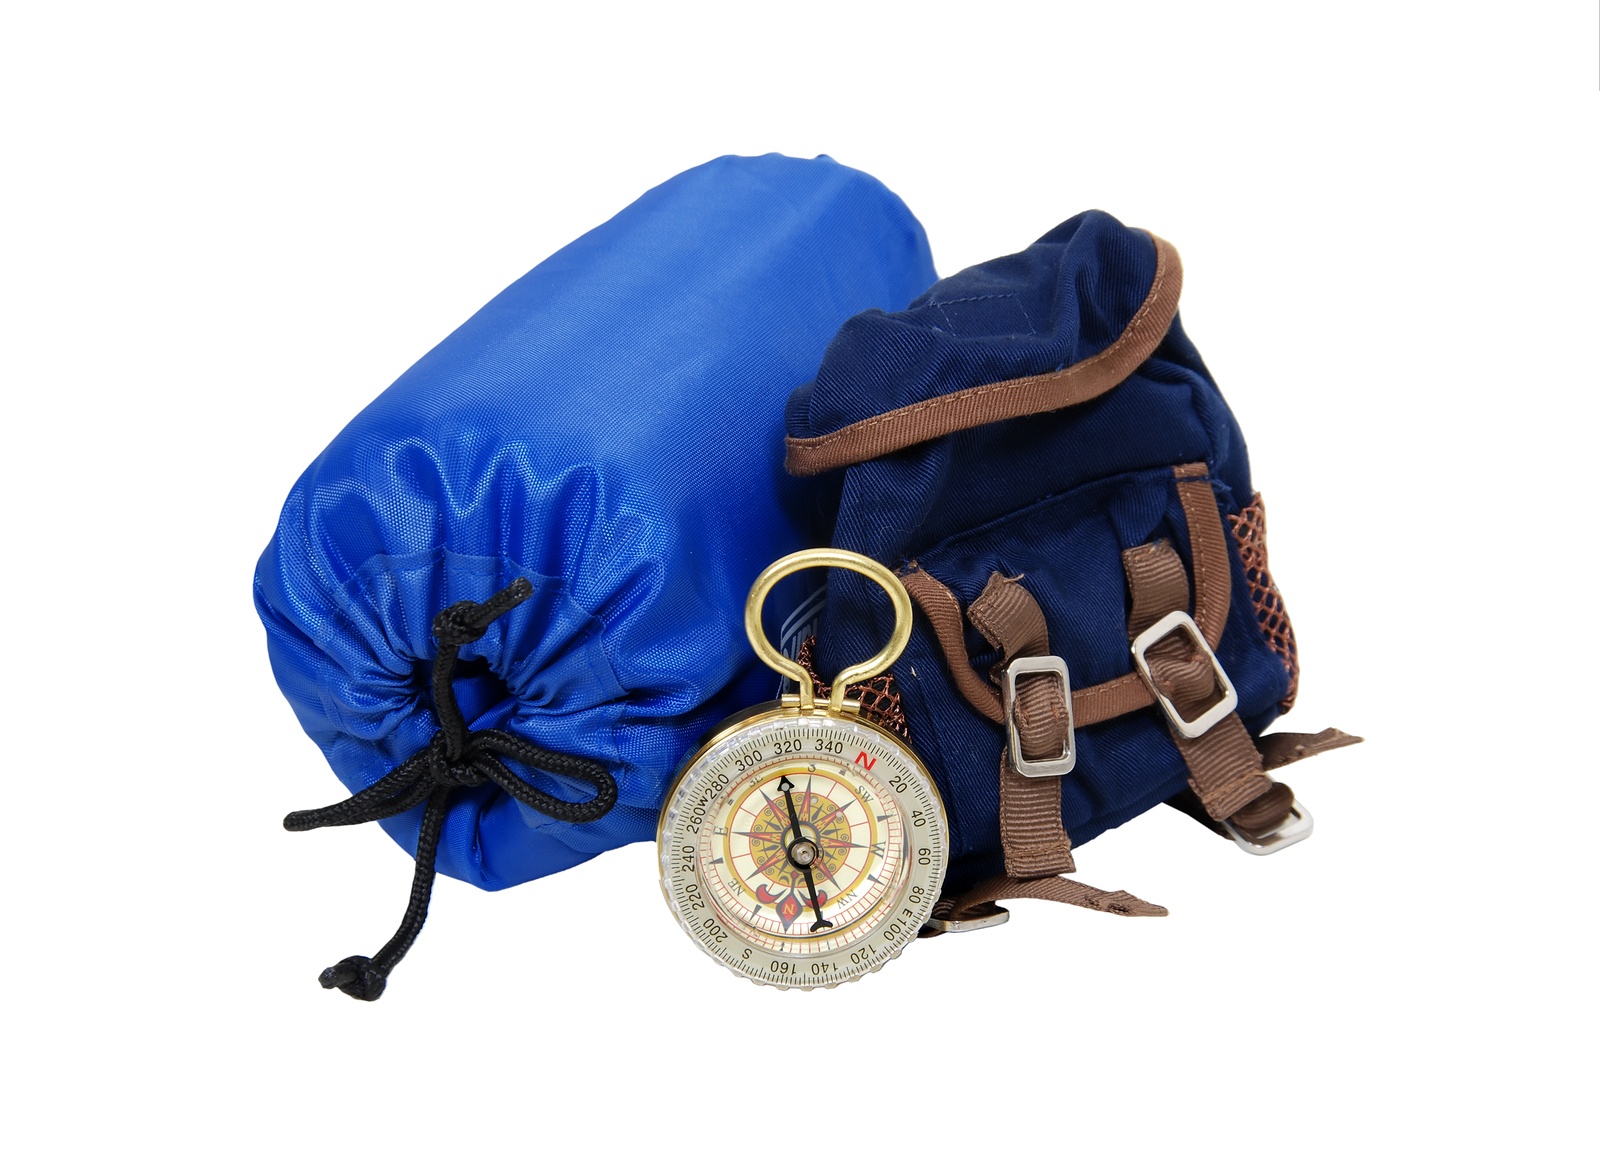 Backpack with rolled up sleeping bag and compass for overnight trips - path included